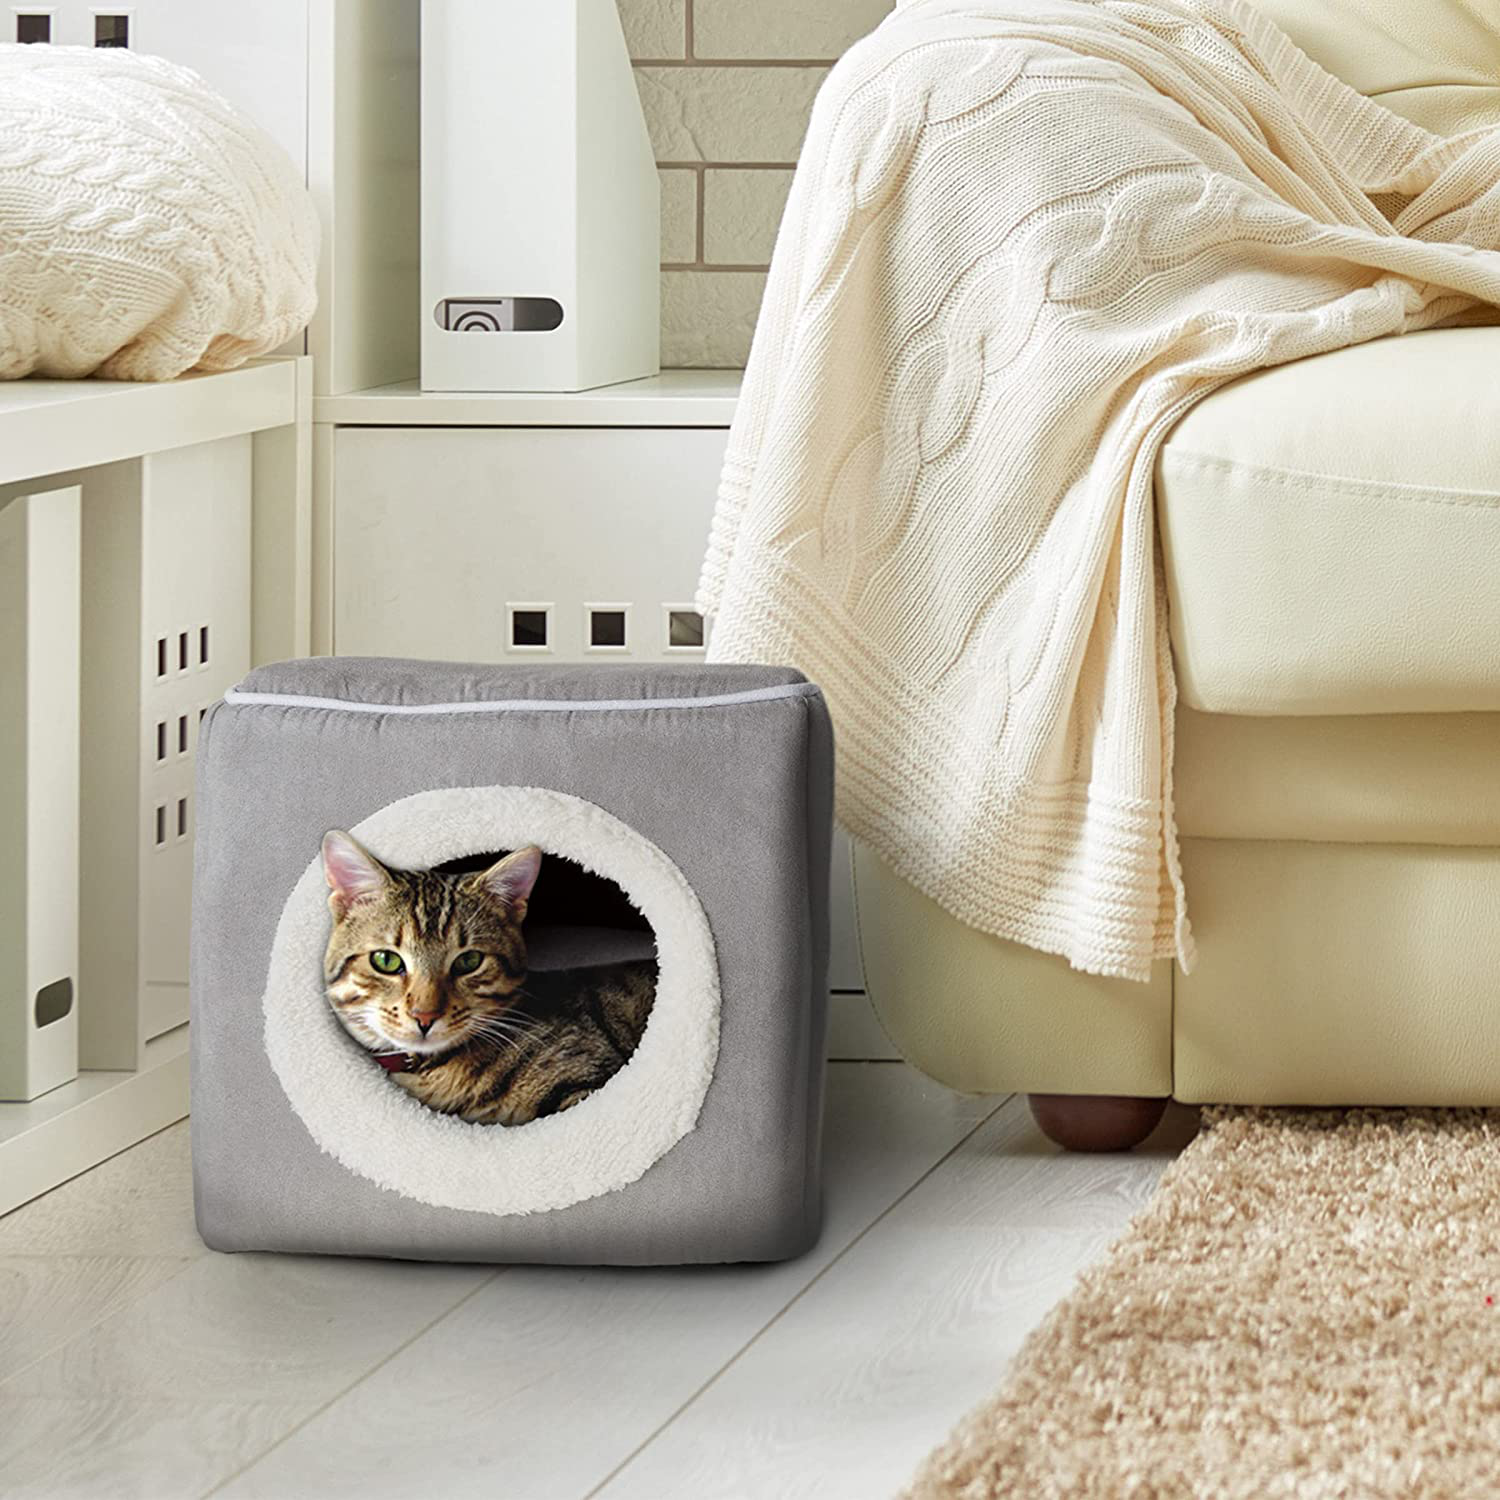 PETMAKER Cave Pet Bed Collection - Soft Indoor Enclosed Covered Cavern/House for Cats, Kittens, and Small Pets with Removable Cushion Pad